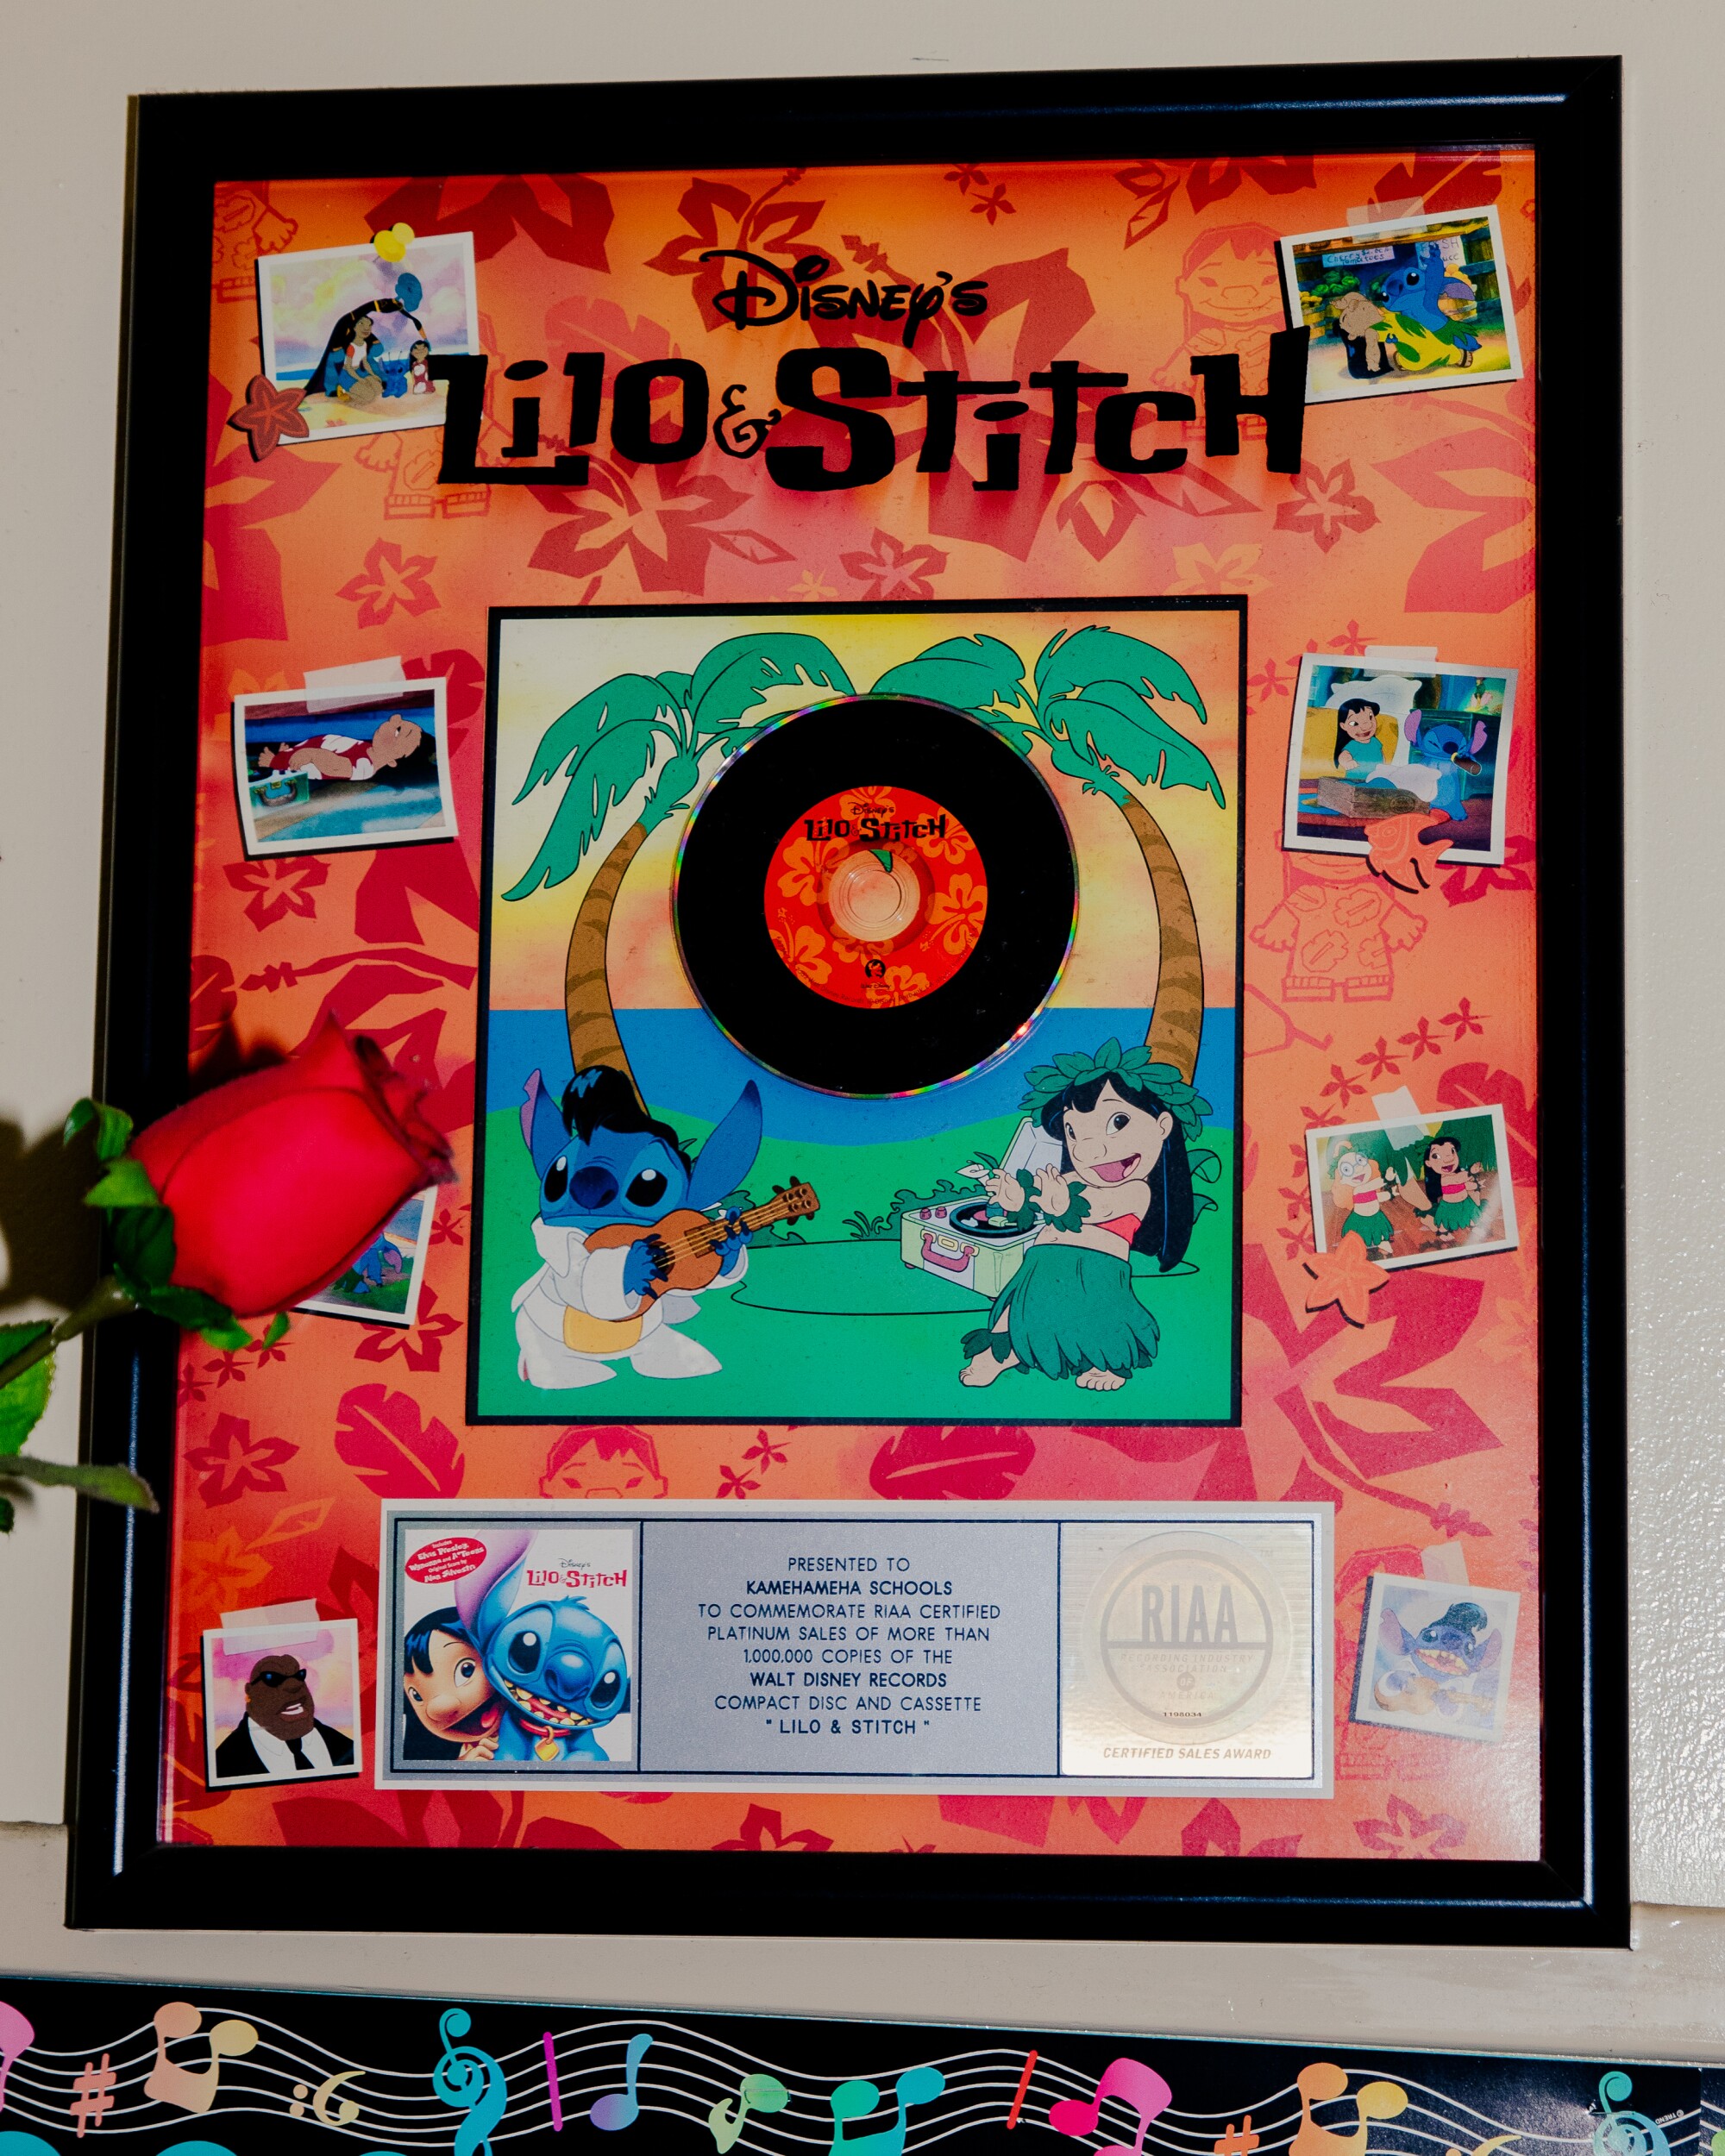 A framed plaque with a record and images from the cartoon film "Lilo & Stitch"